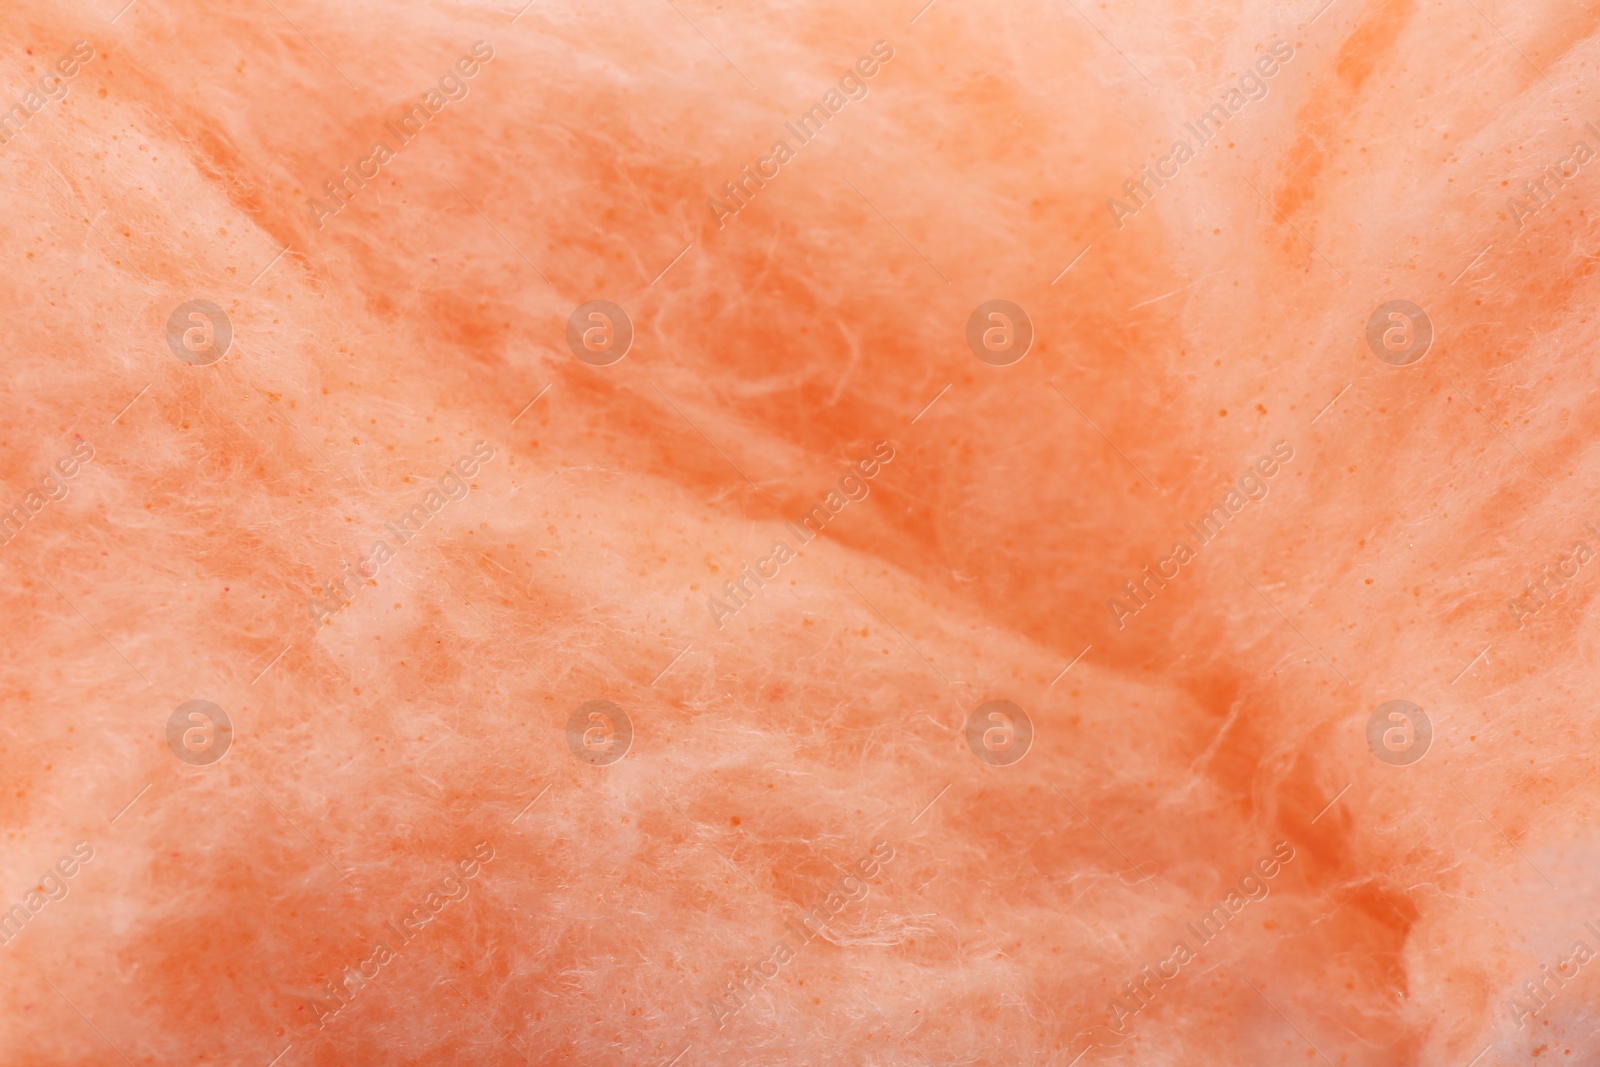 Photo of Orange cotton candy as background, closeup view